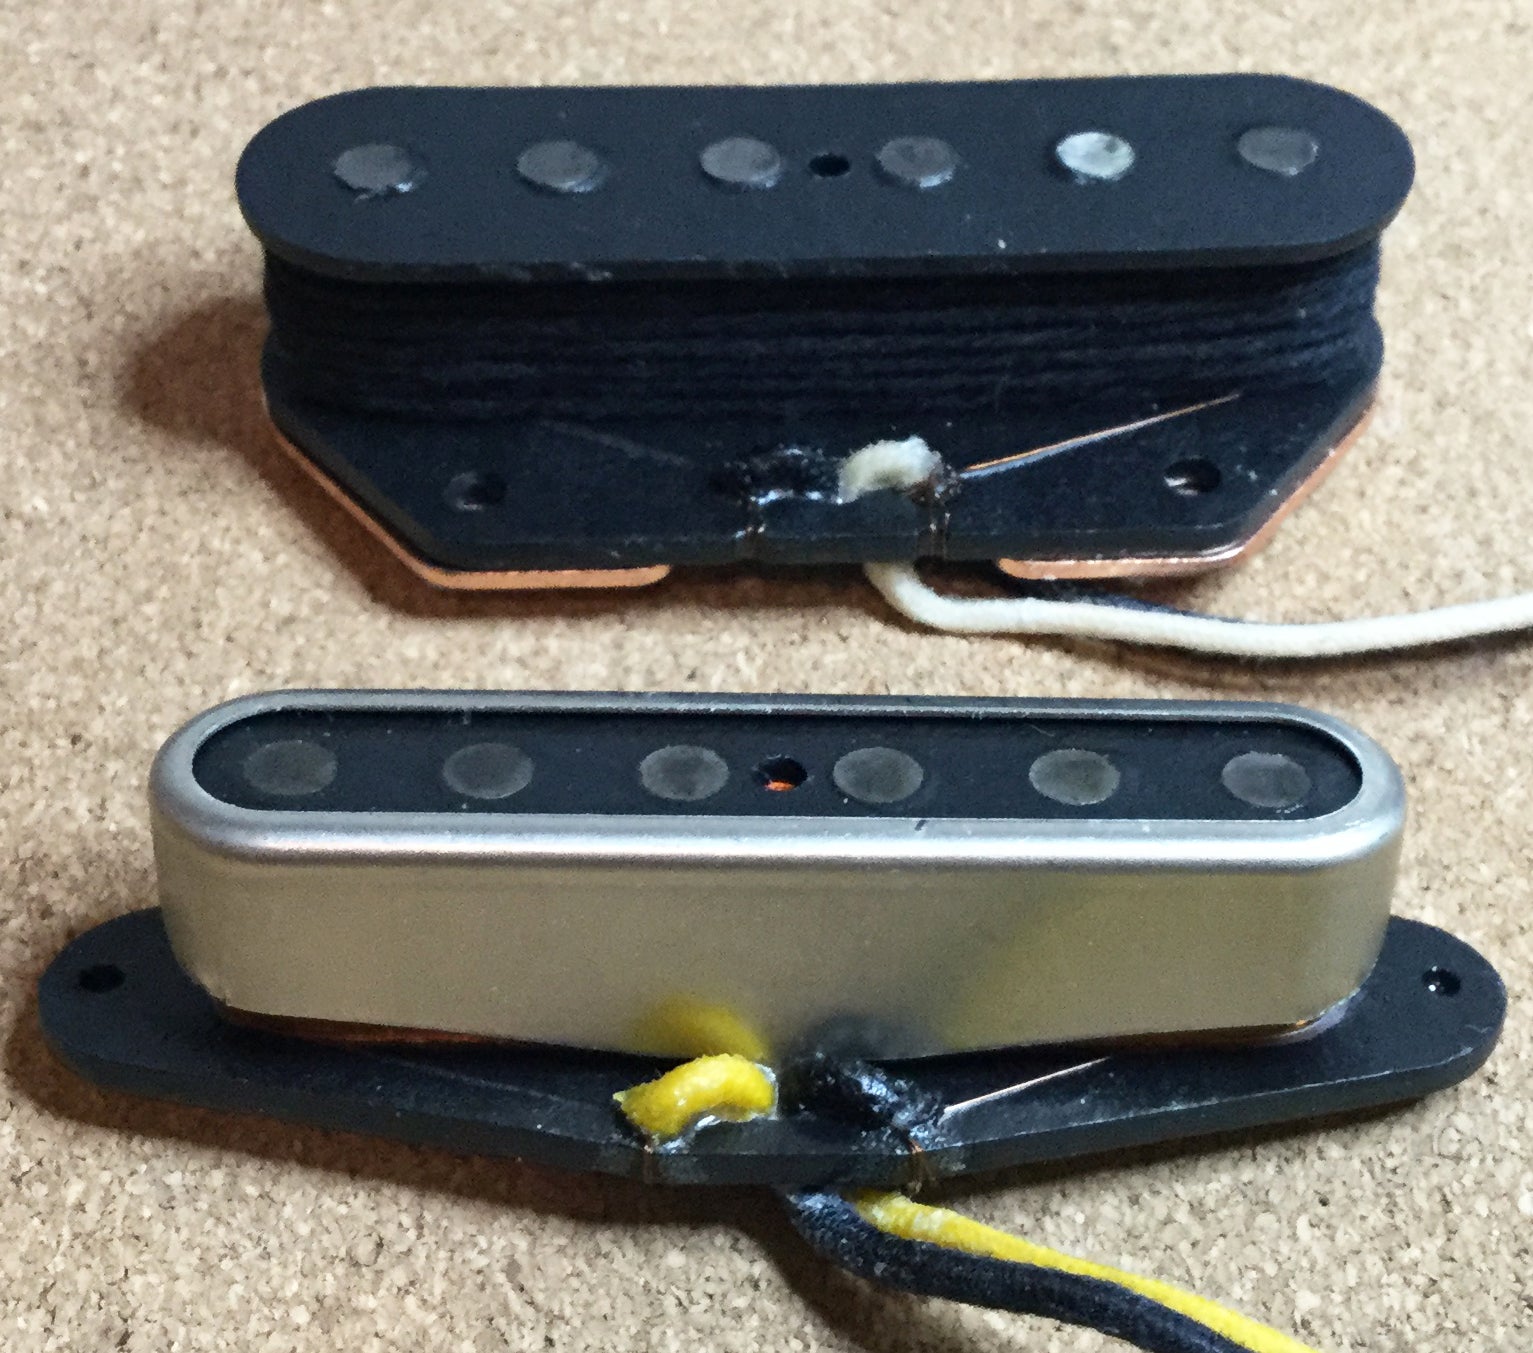 Migas Touch Telecaster Pickups – Migas Touch Pickups